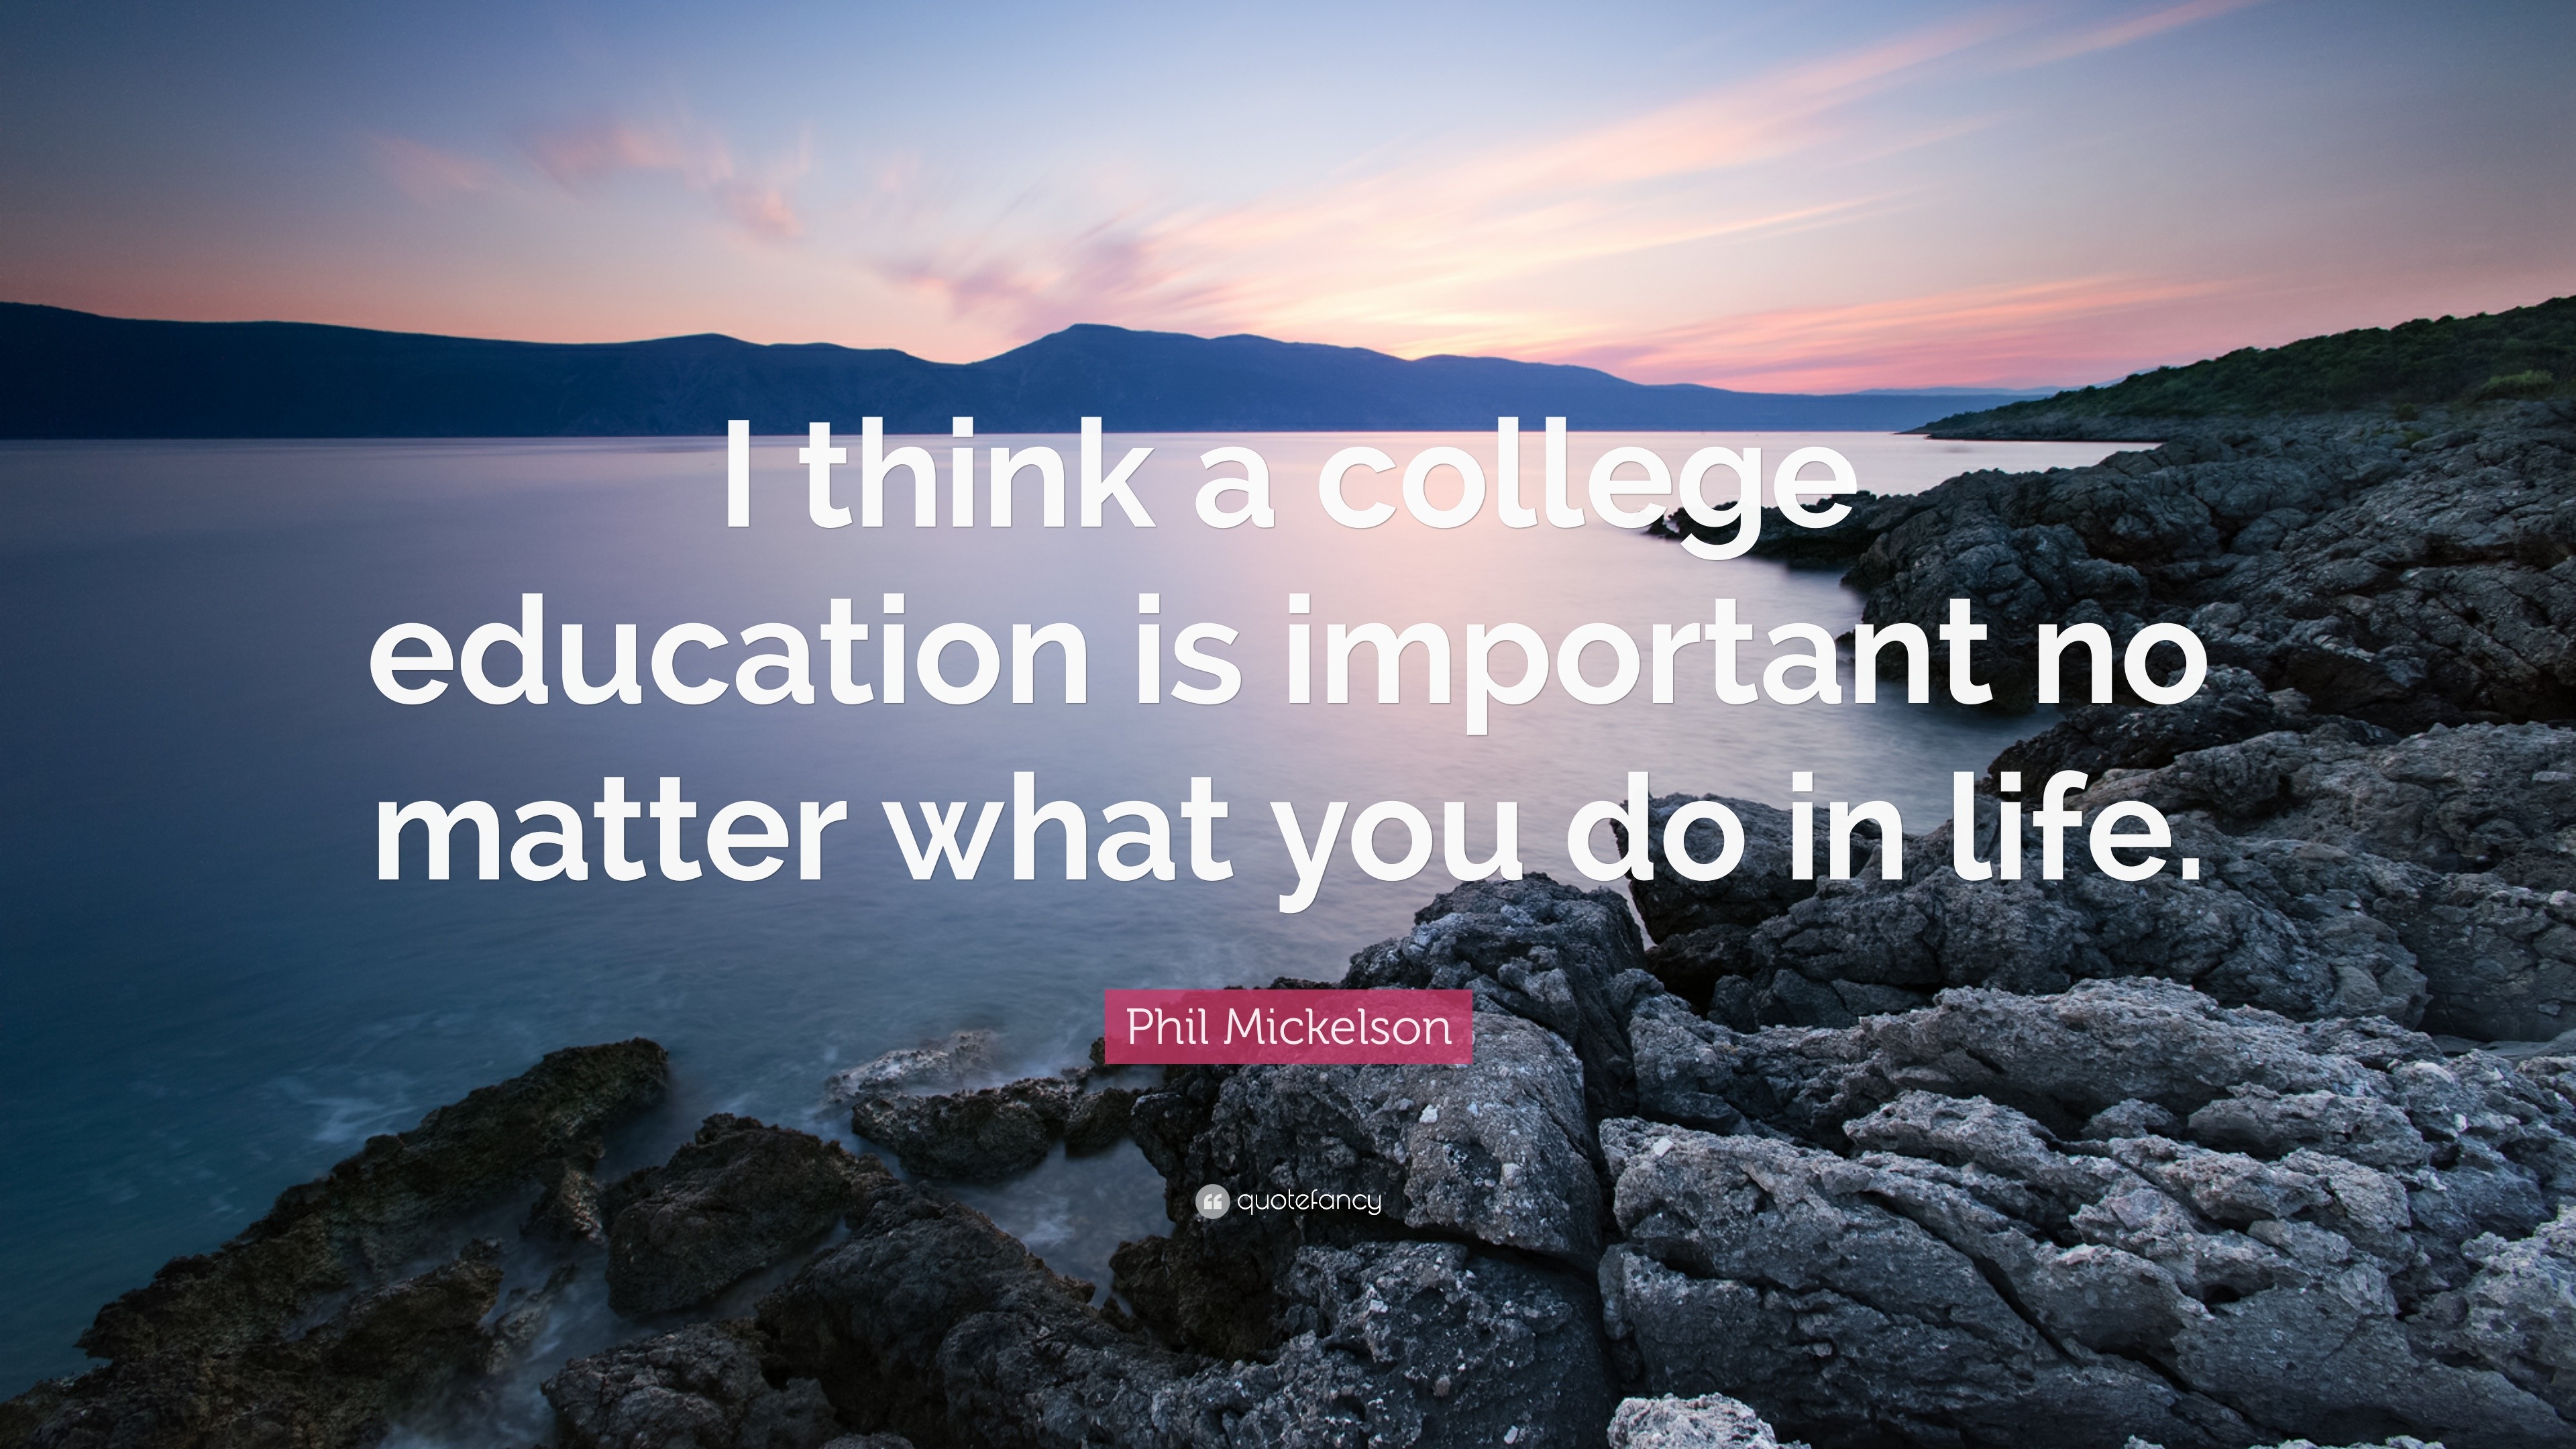 education is the most important thing in life